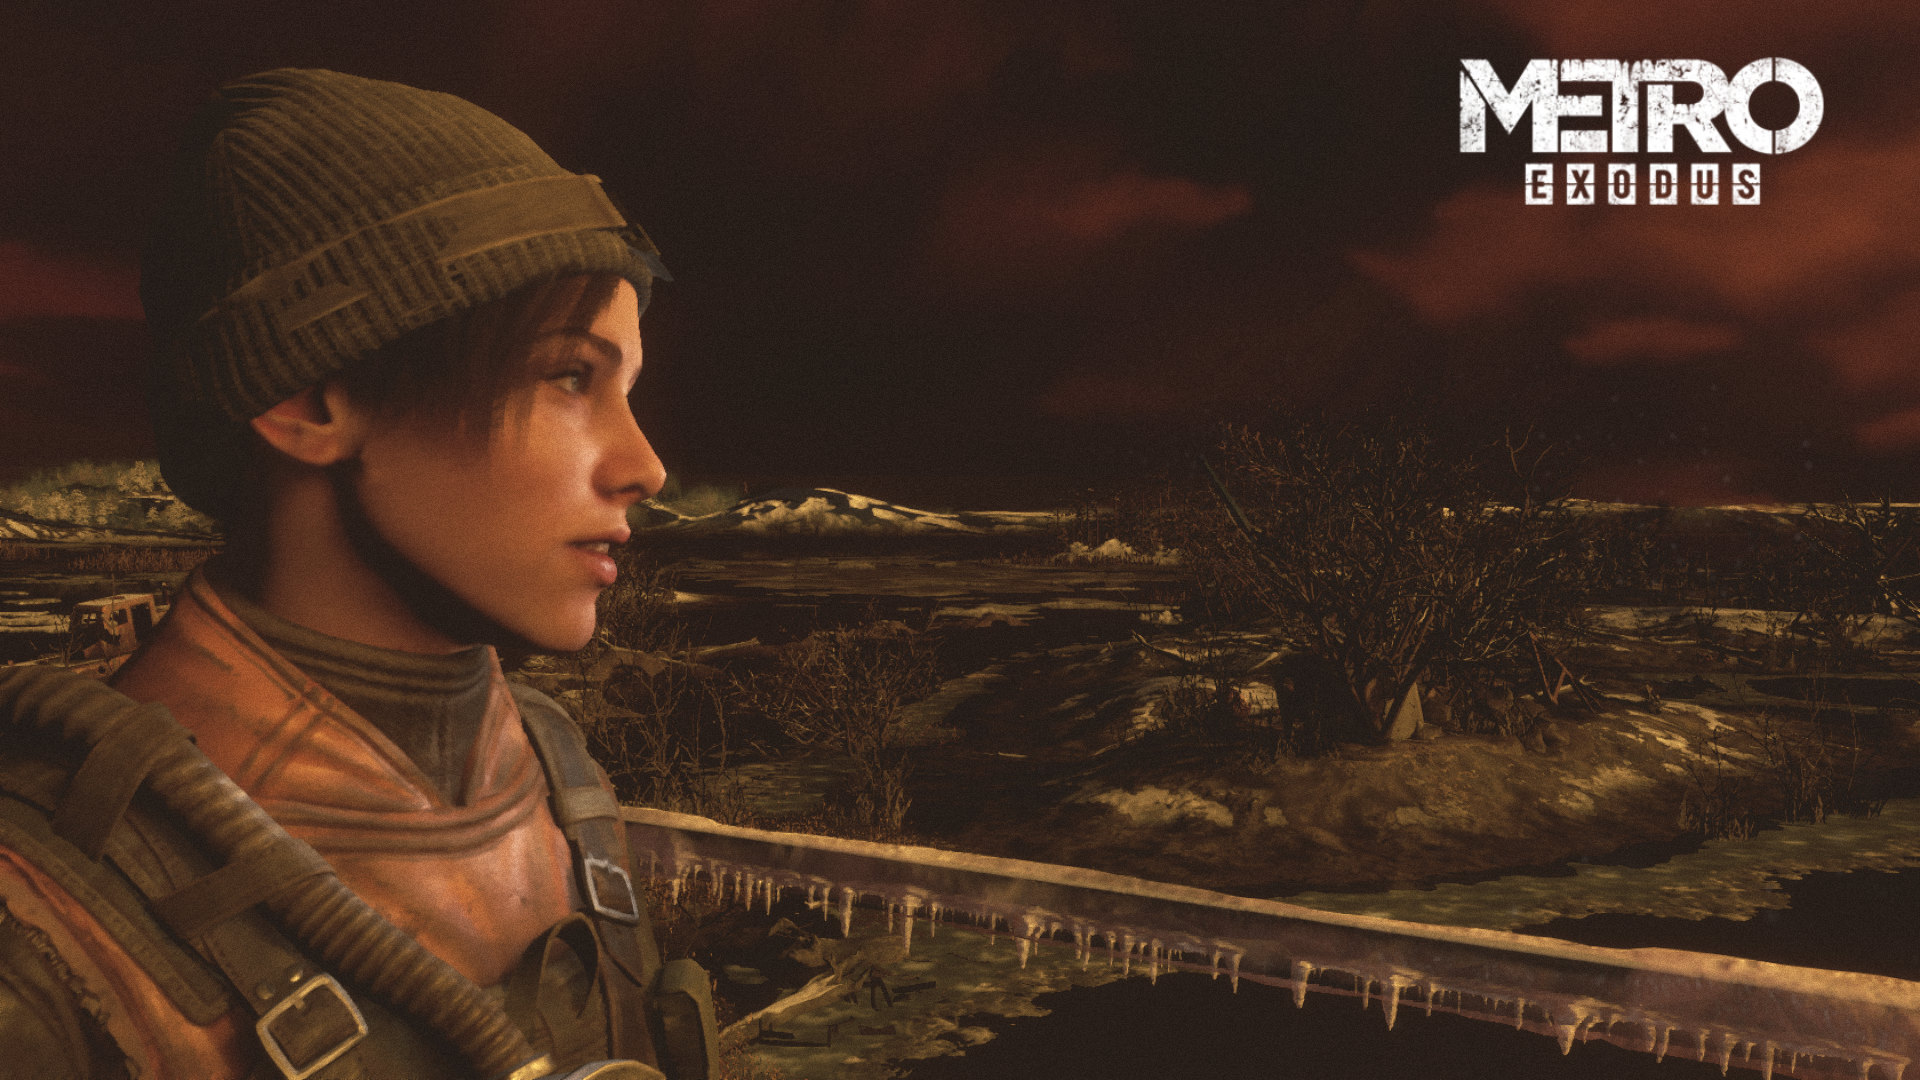 Metro Exodus Video Games PC Gaming Video Game Girls Video Game Characters Woolly Hat Screen Shot 1920x1080